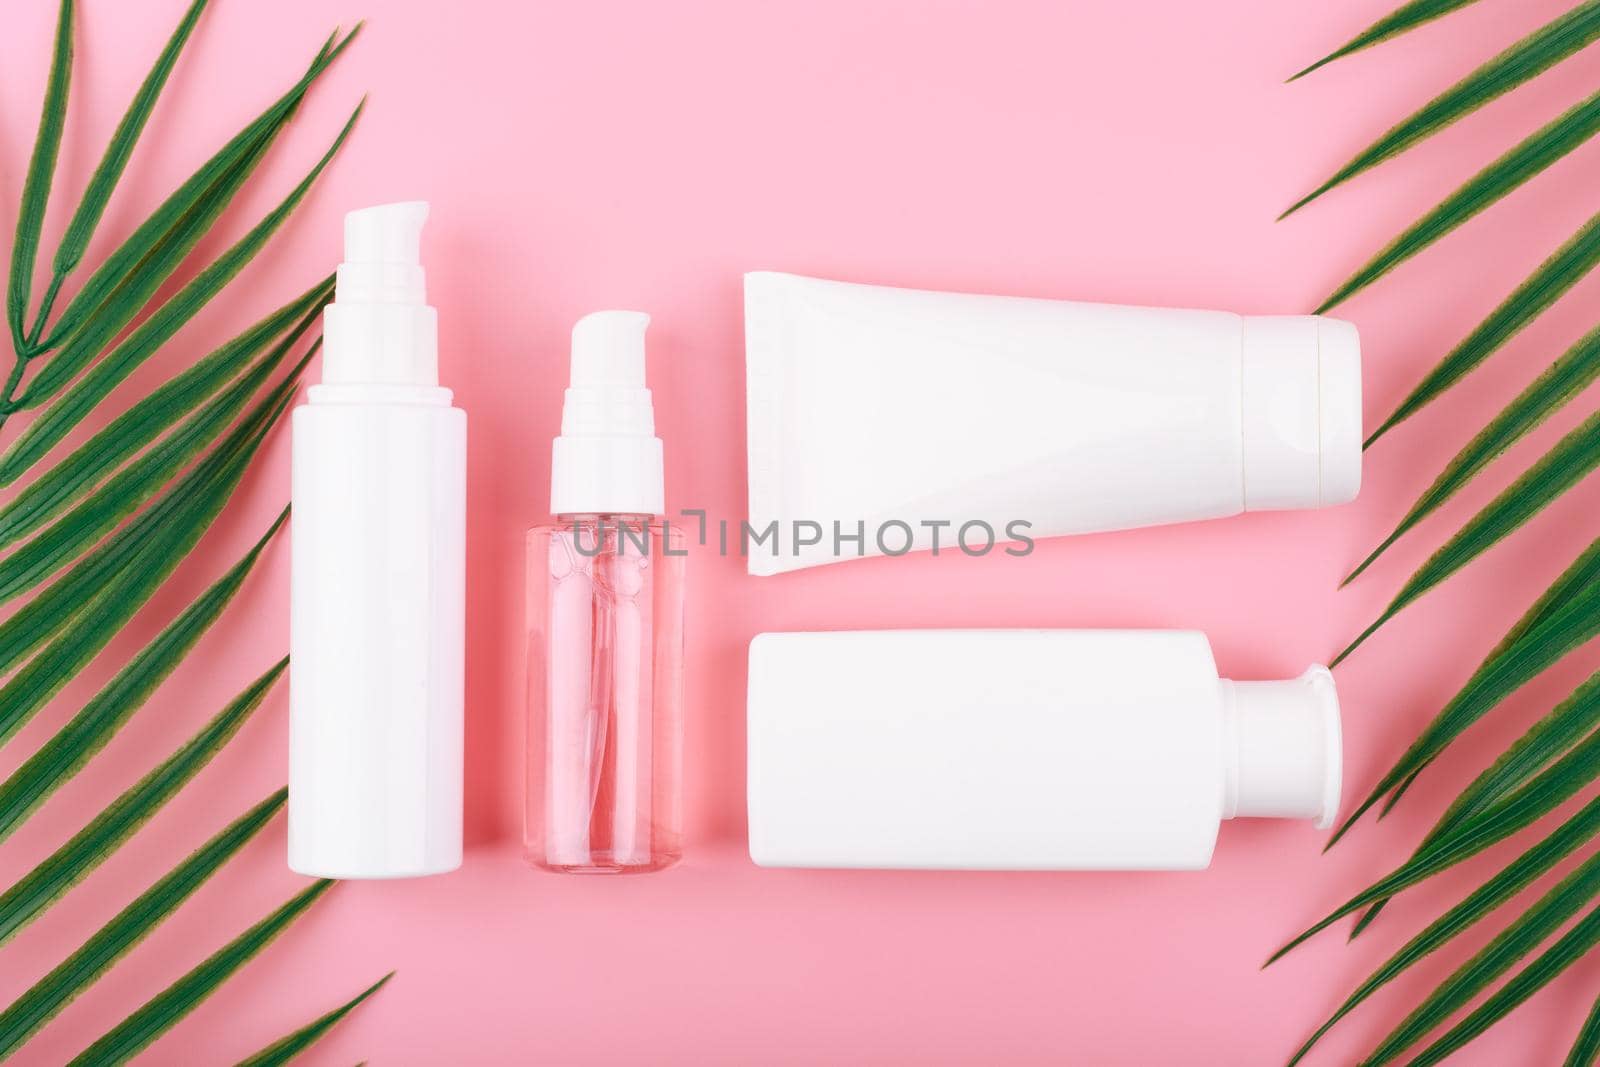 Creative flat lay with cosmetic products for cleaning, moisturizing and exfoliating on pink background with palm leaves. Concept of organic natural beauty products for daily skin care